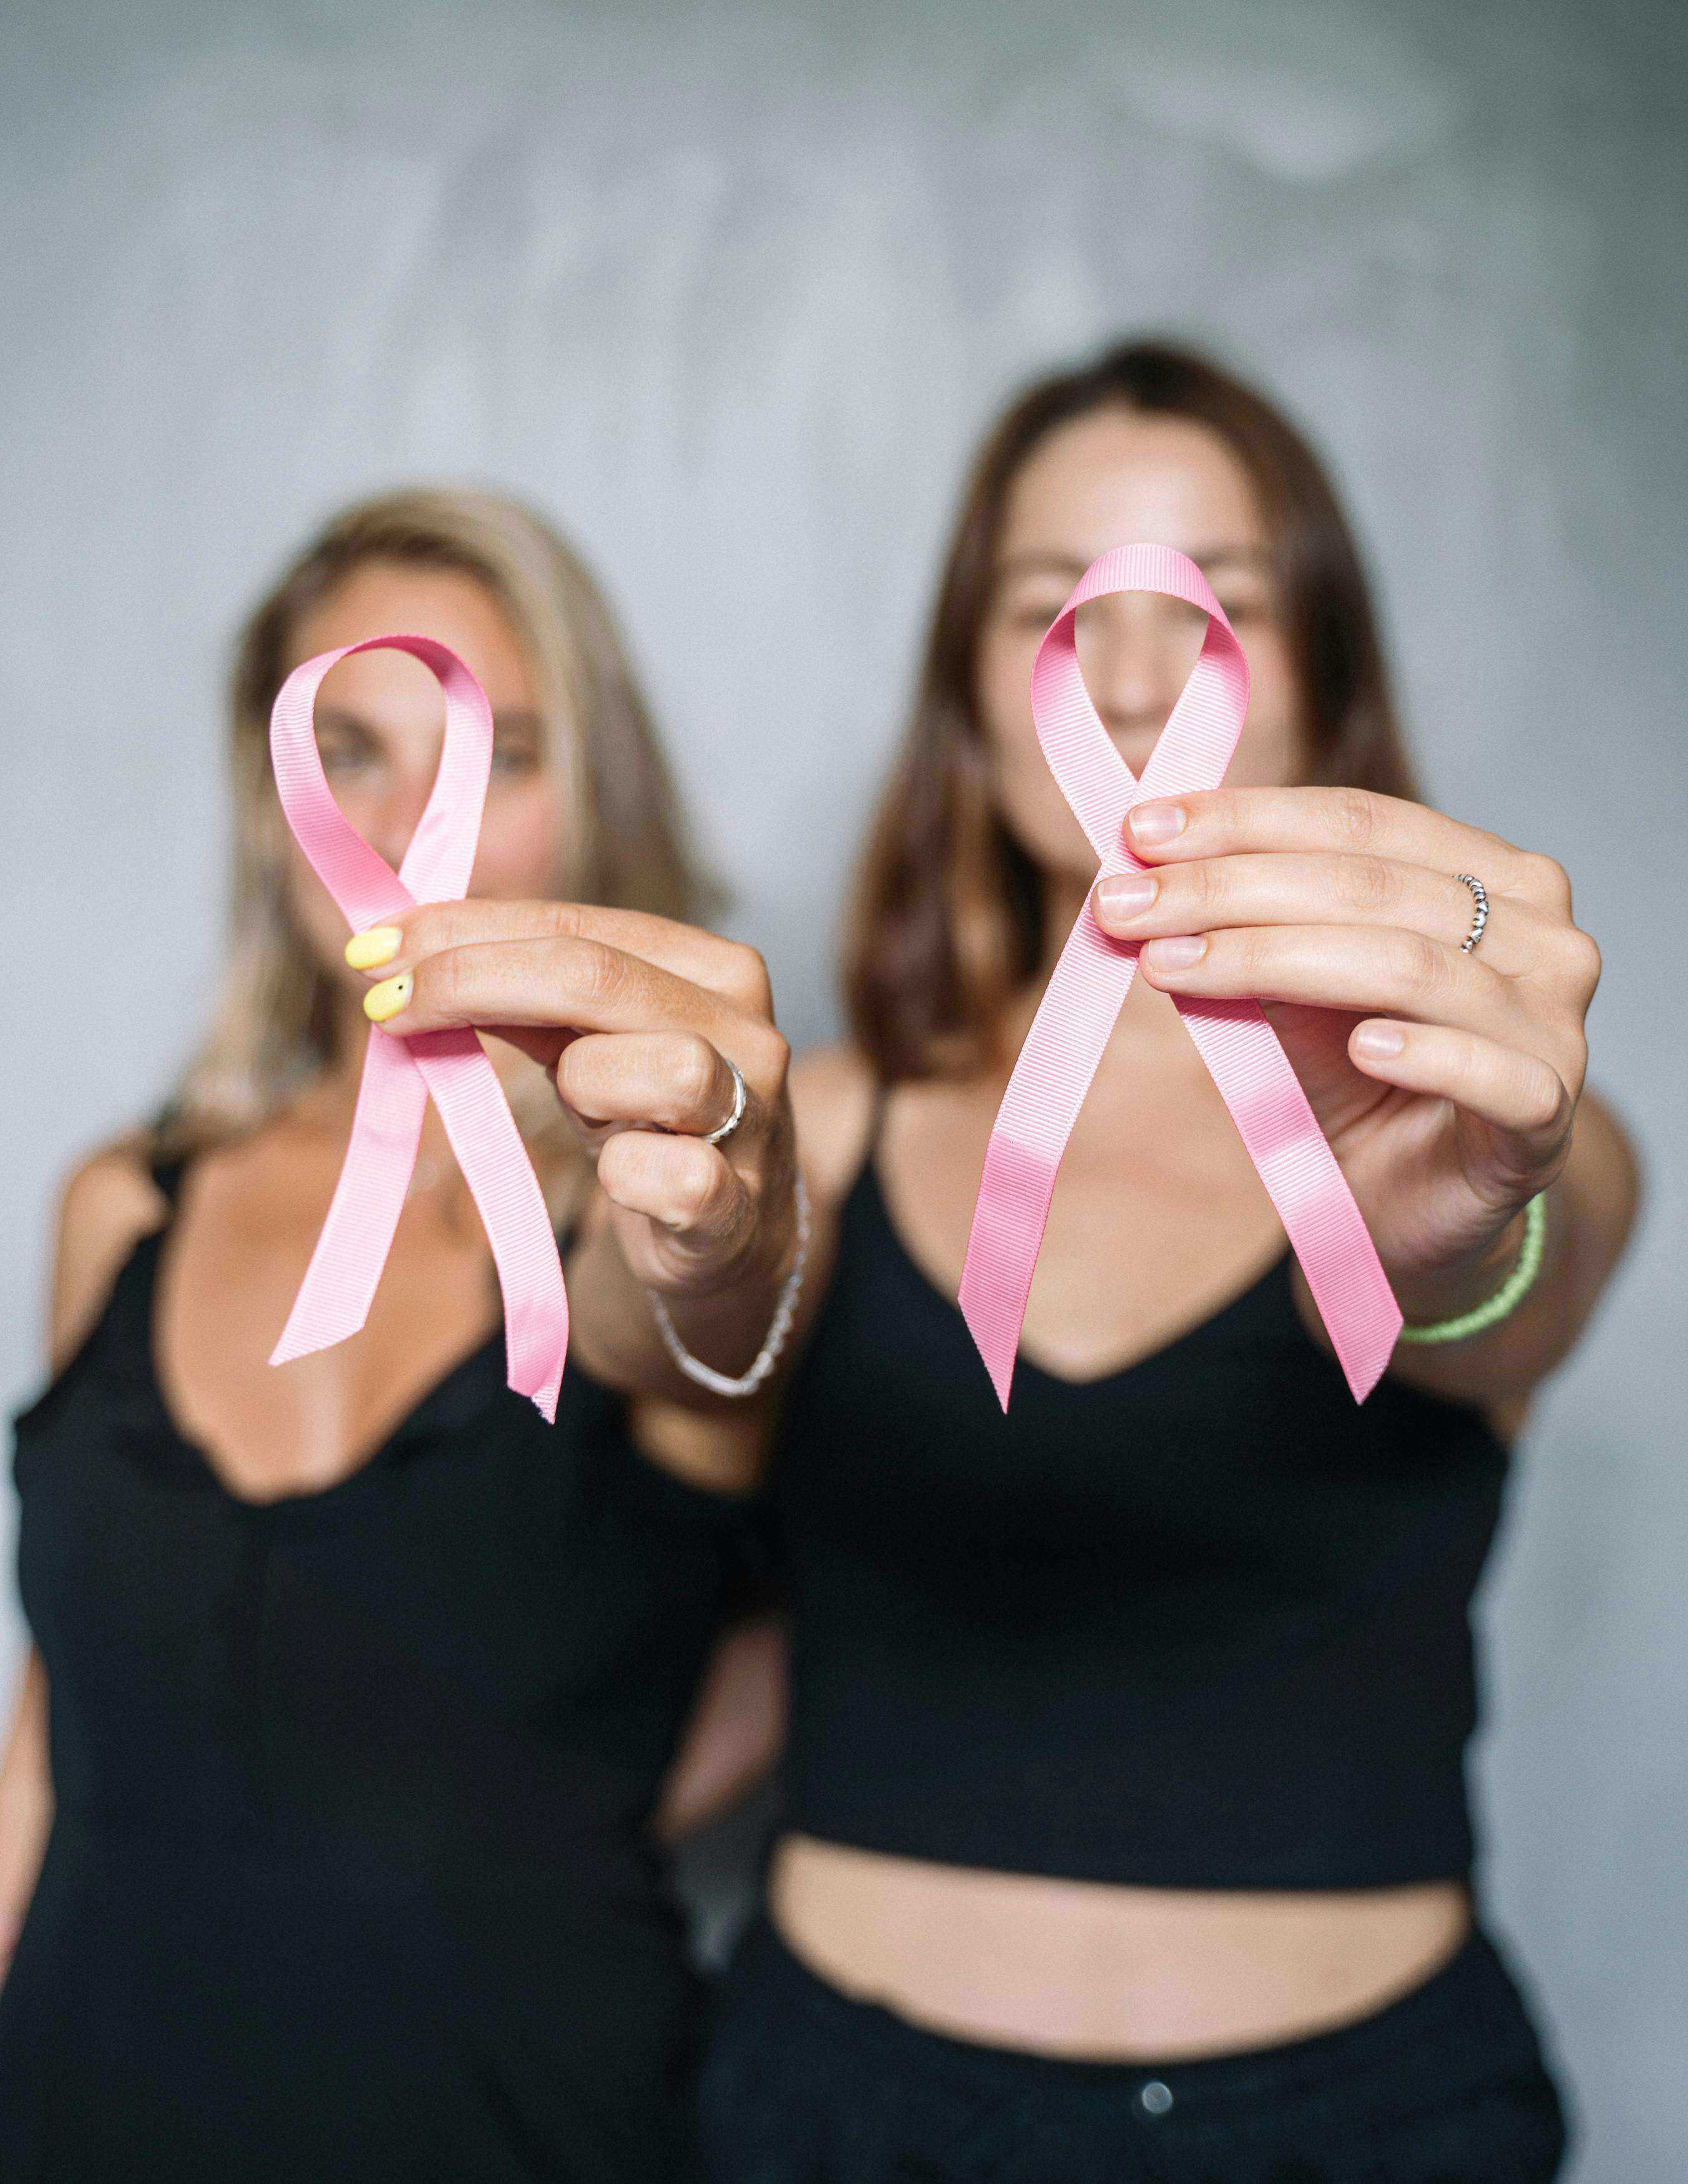 Breast cancer, fertility and pregnancy